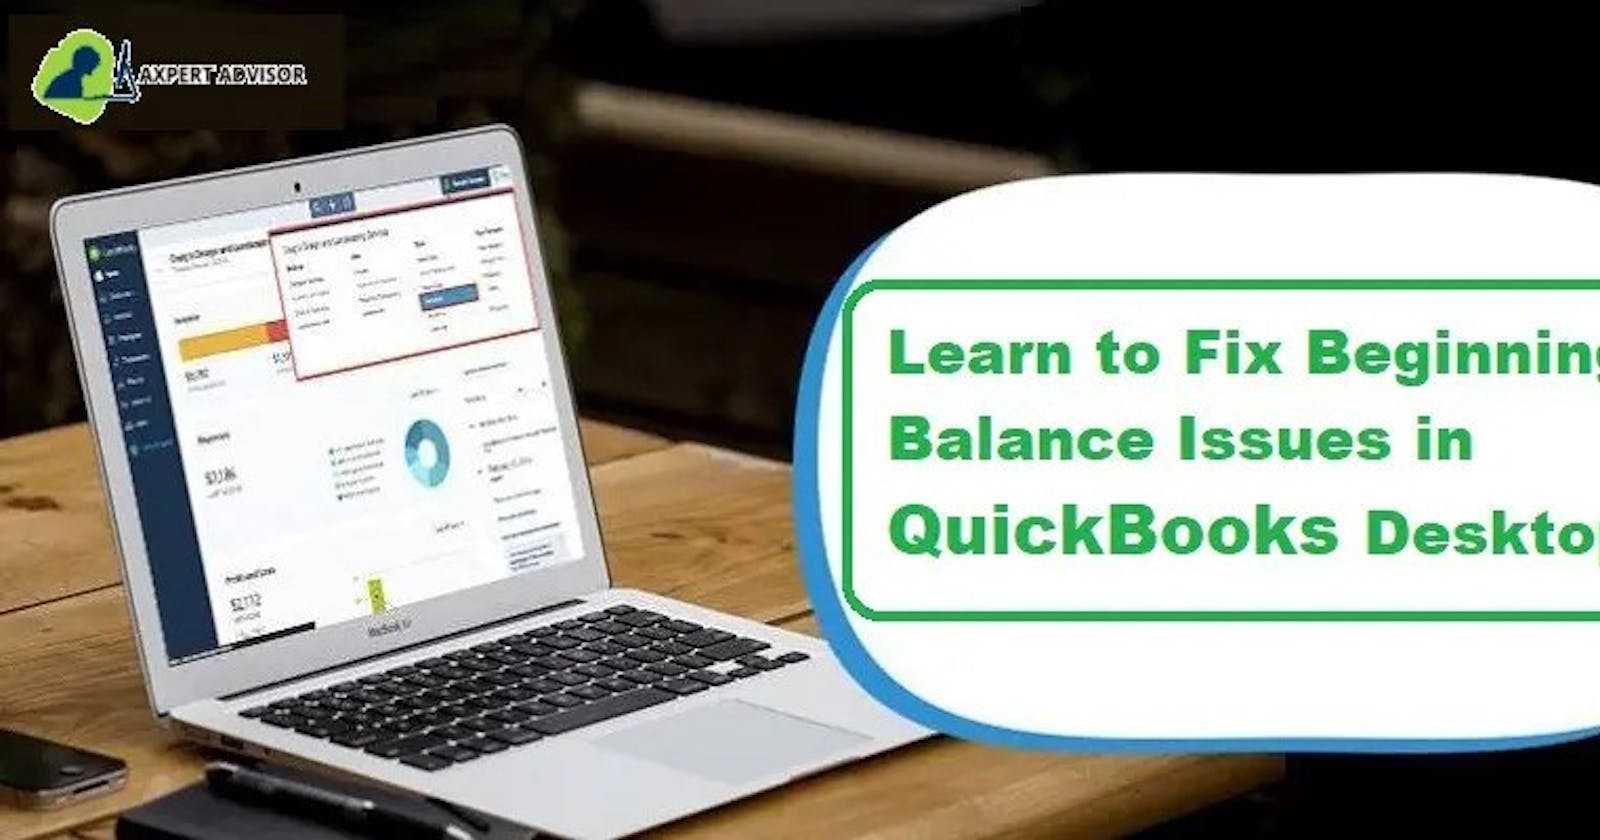 How to Fix Your Beginning Balance Issues in QuickBooks Desktop?